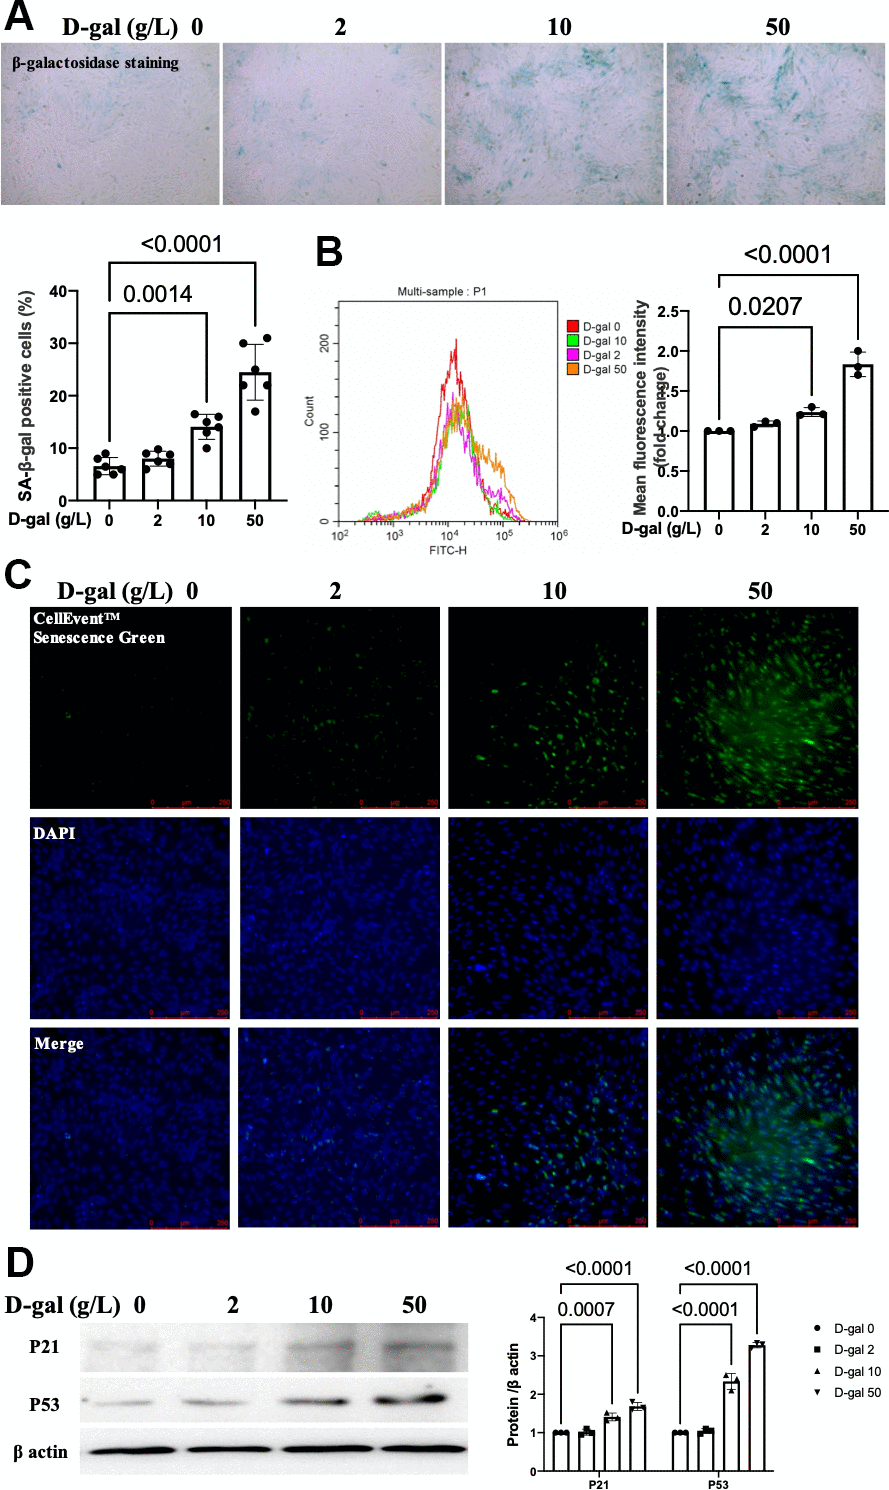 D-gal induced-H9c2 cells caused cardiocytes aging changes in a concentration-dependent manner. H9c2 cells were treated with different concentrations of D-gal (0, 2, 10 and 50 g/L) for 24 hours. (A) The H9c2 cells senescence induced by D-gal was identified by β-galactosidase staining (100×). Representative bright-field photomicrographs were captured. The blue-stained cells were designated as aging cardiocytes. The blue-stained cells and the total number of cells were counted, and the percentage of cells expressing β-galactosidase was calculated. (B) Flow cytometry analysis was applied to detect the β-galactosidase mean fluorescence intensity after different D-gal concentration senescence induction. (C) H9c2 cells were stained using the CellEvent™ Senescence Green Probe (200×). An increase in senescence-associated β-galactosidase expression, a hallmark for the onset of senescence, could be detected by the CellEvent™ Senescence Green Probe with a fluorescence microscope. (D) The aging-associated proteins (P53, P21) were detected by western blot, and the corresponding quantification was present.